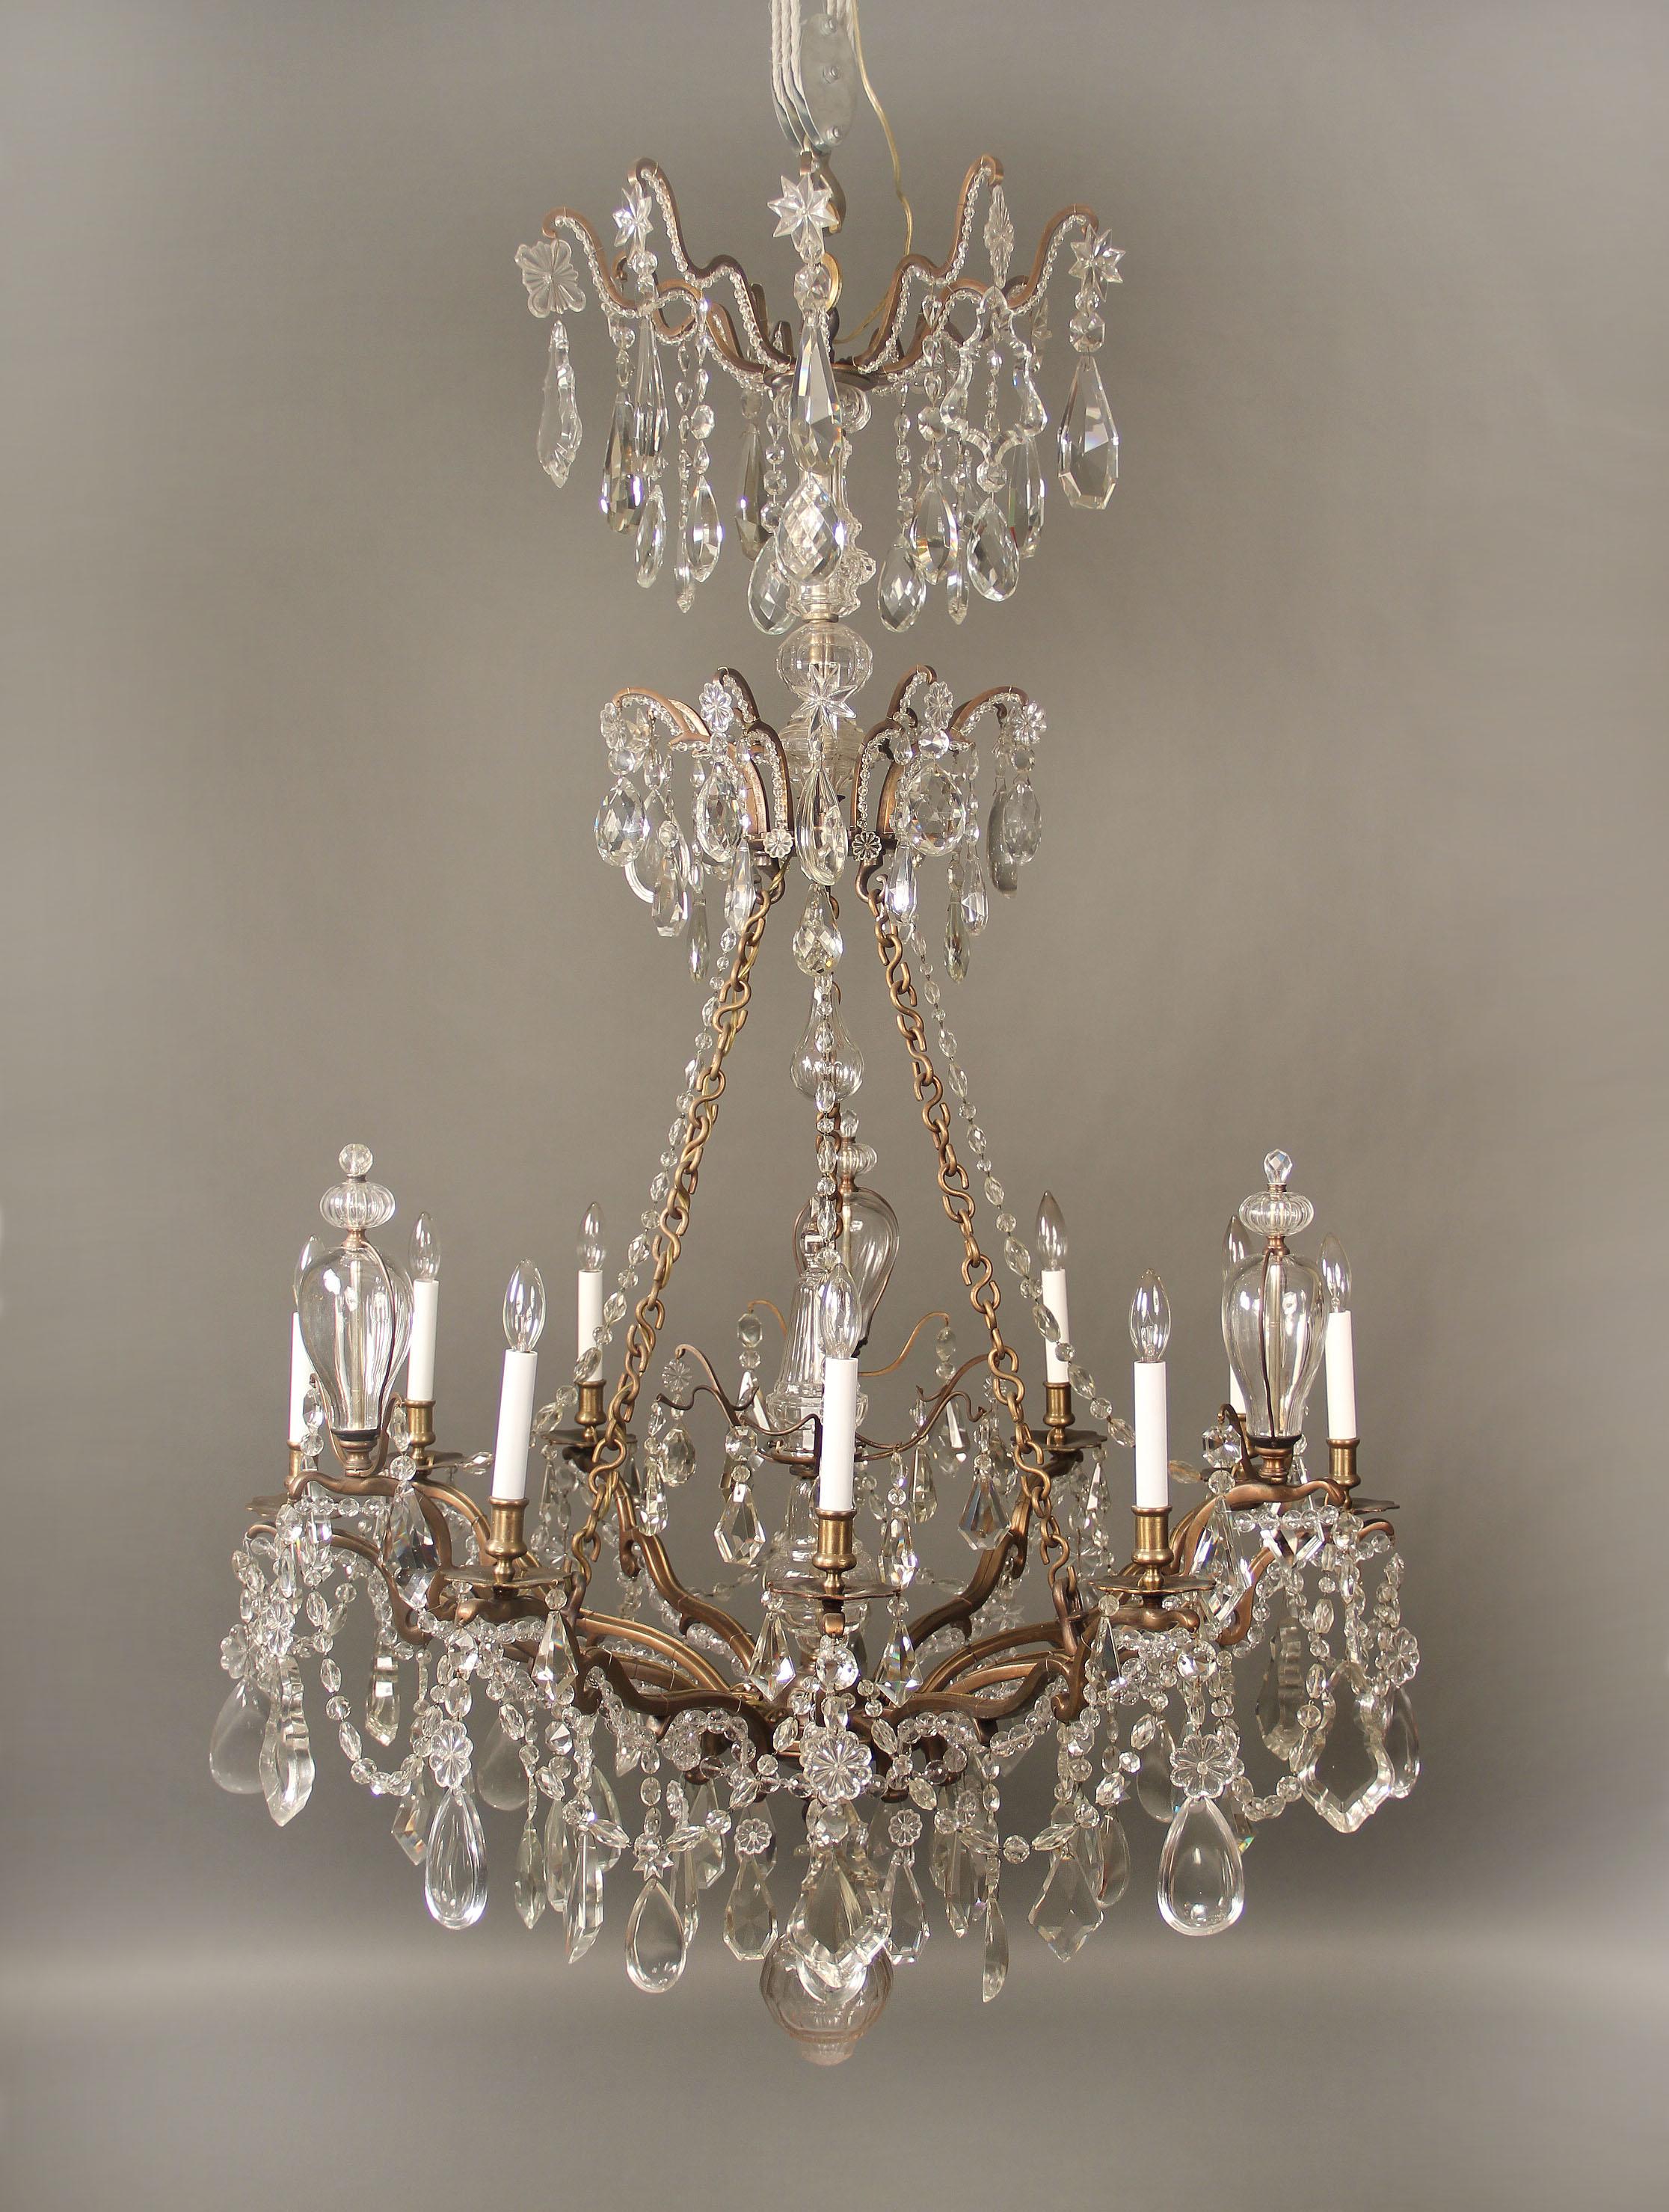 An exceptional late 19th century bronze and crystal ten-light chandelier

Multi-faceted and shaped crystal including half pear designs, three bottles and a central finial, cut crystal central column with beaded arms, one interior and nine